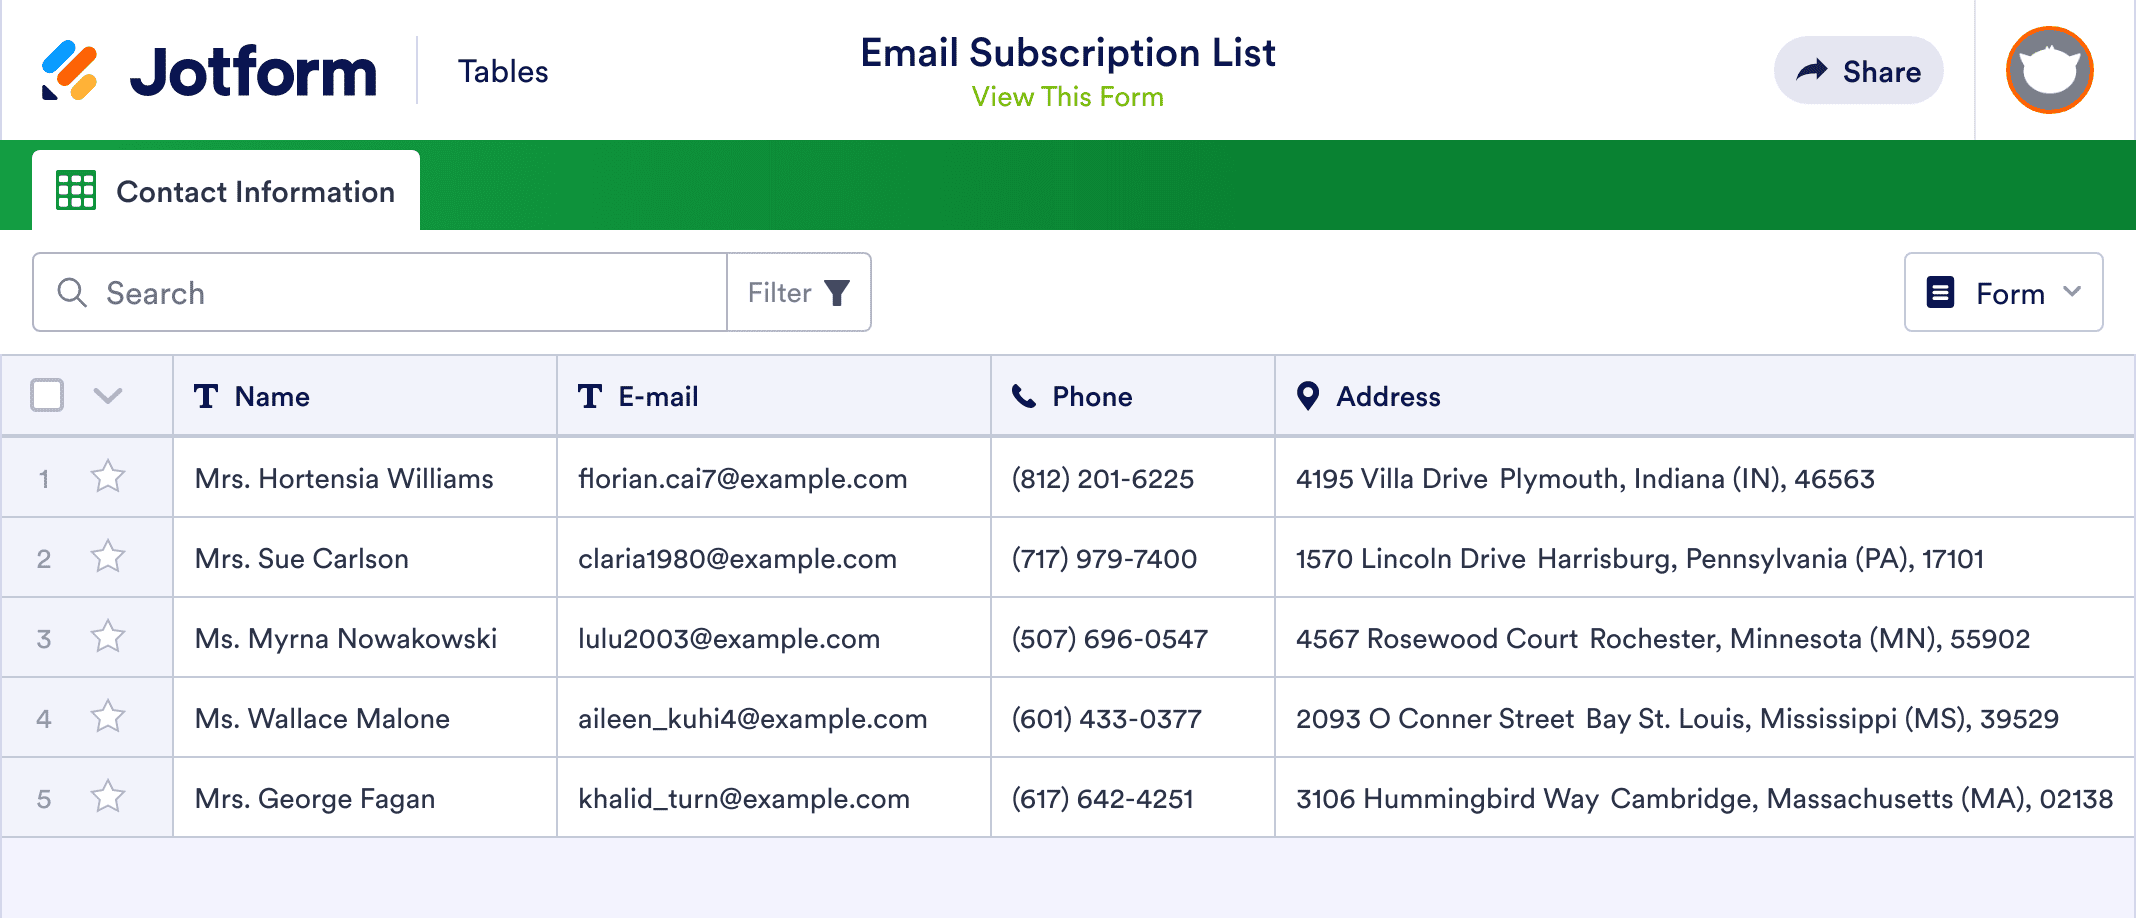 Email Subscription List